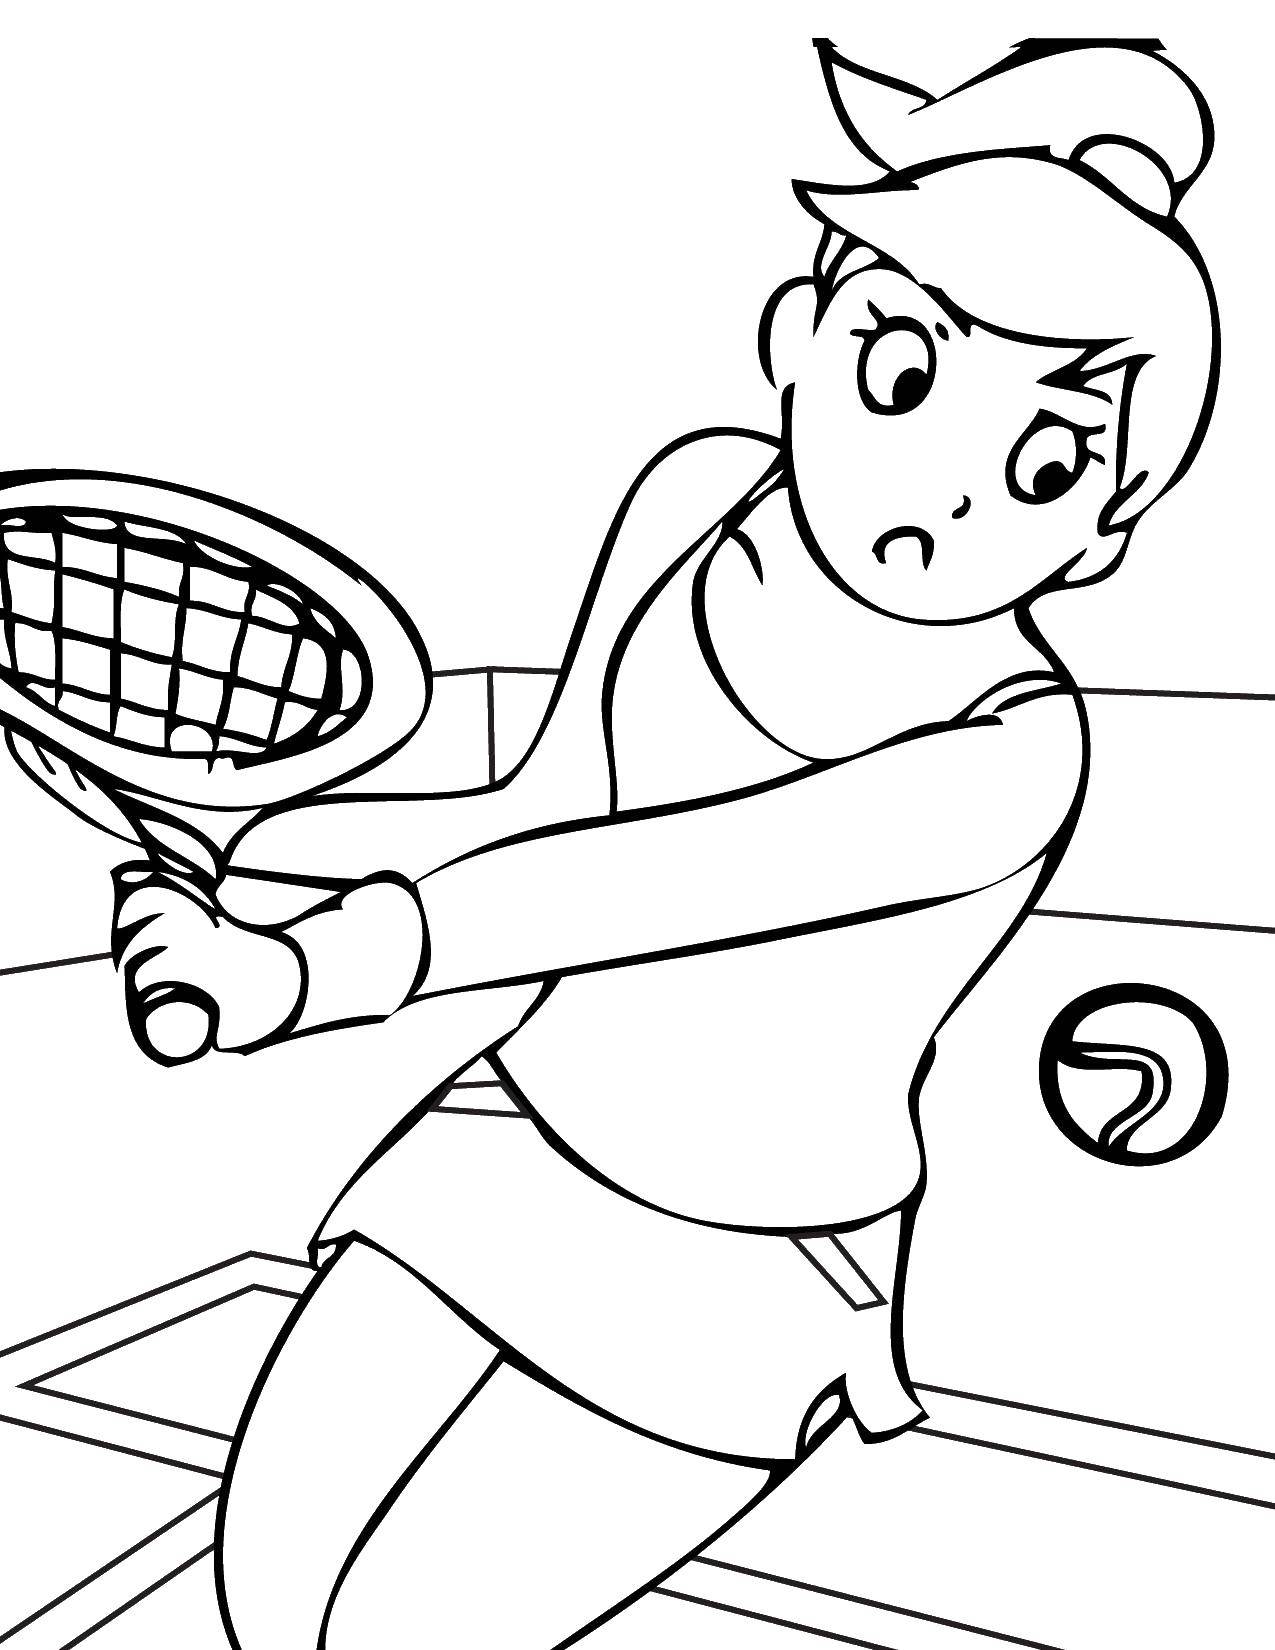 Coloring The girl plays tennis. Category Sports. Tags:  sports, tennis, racquet.